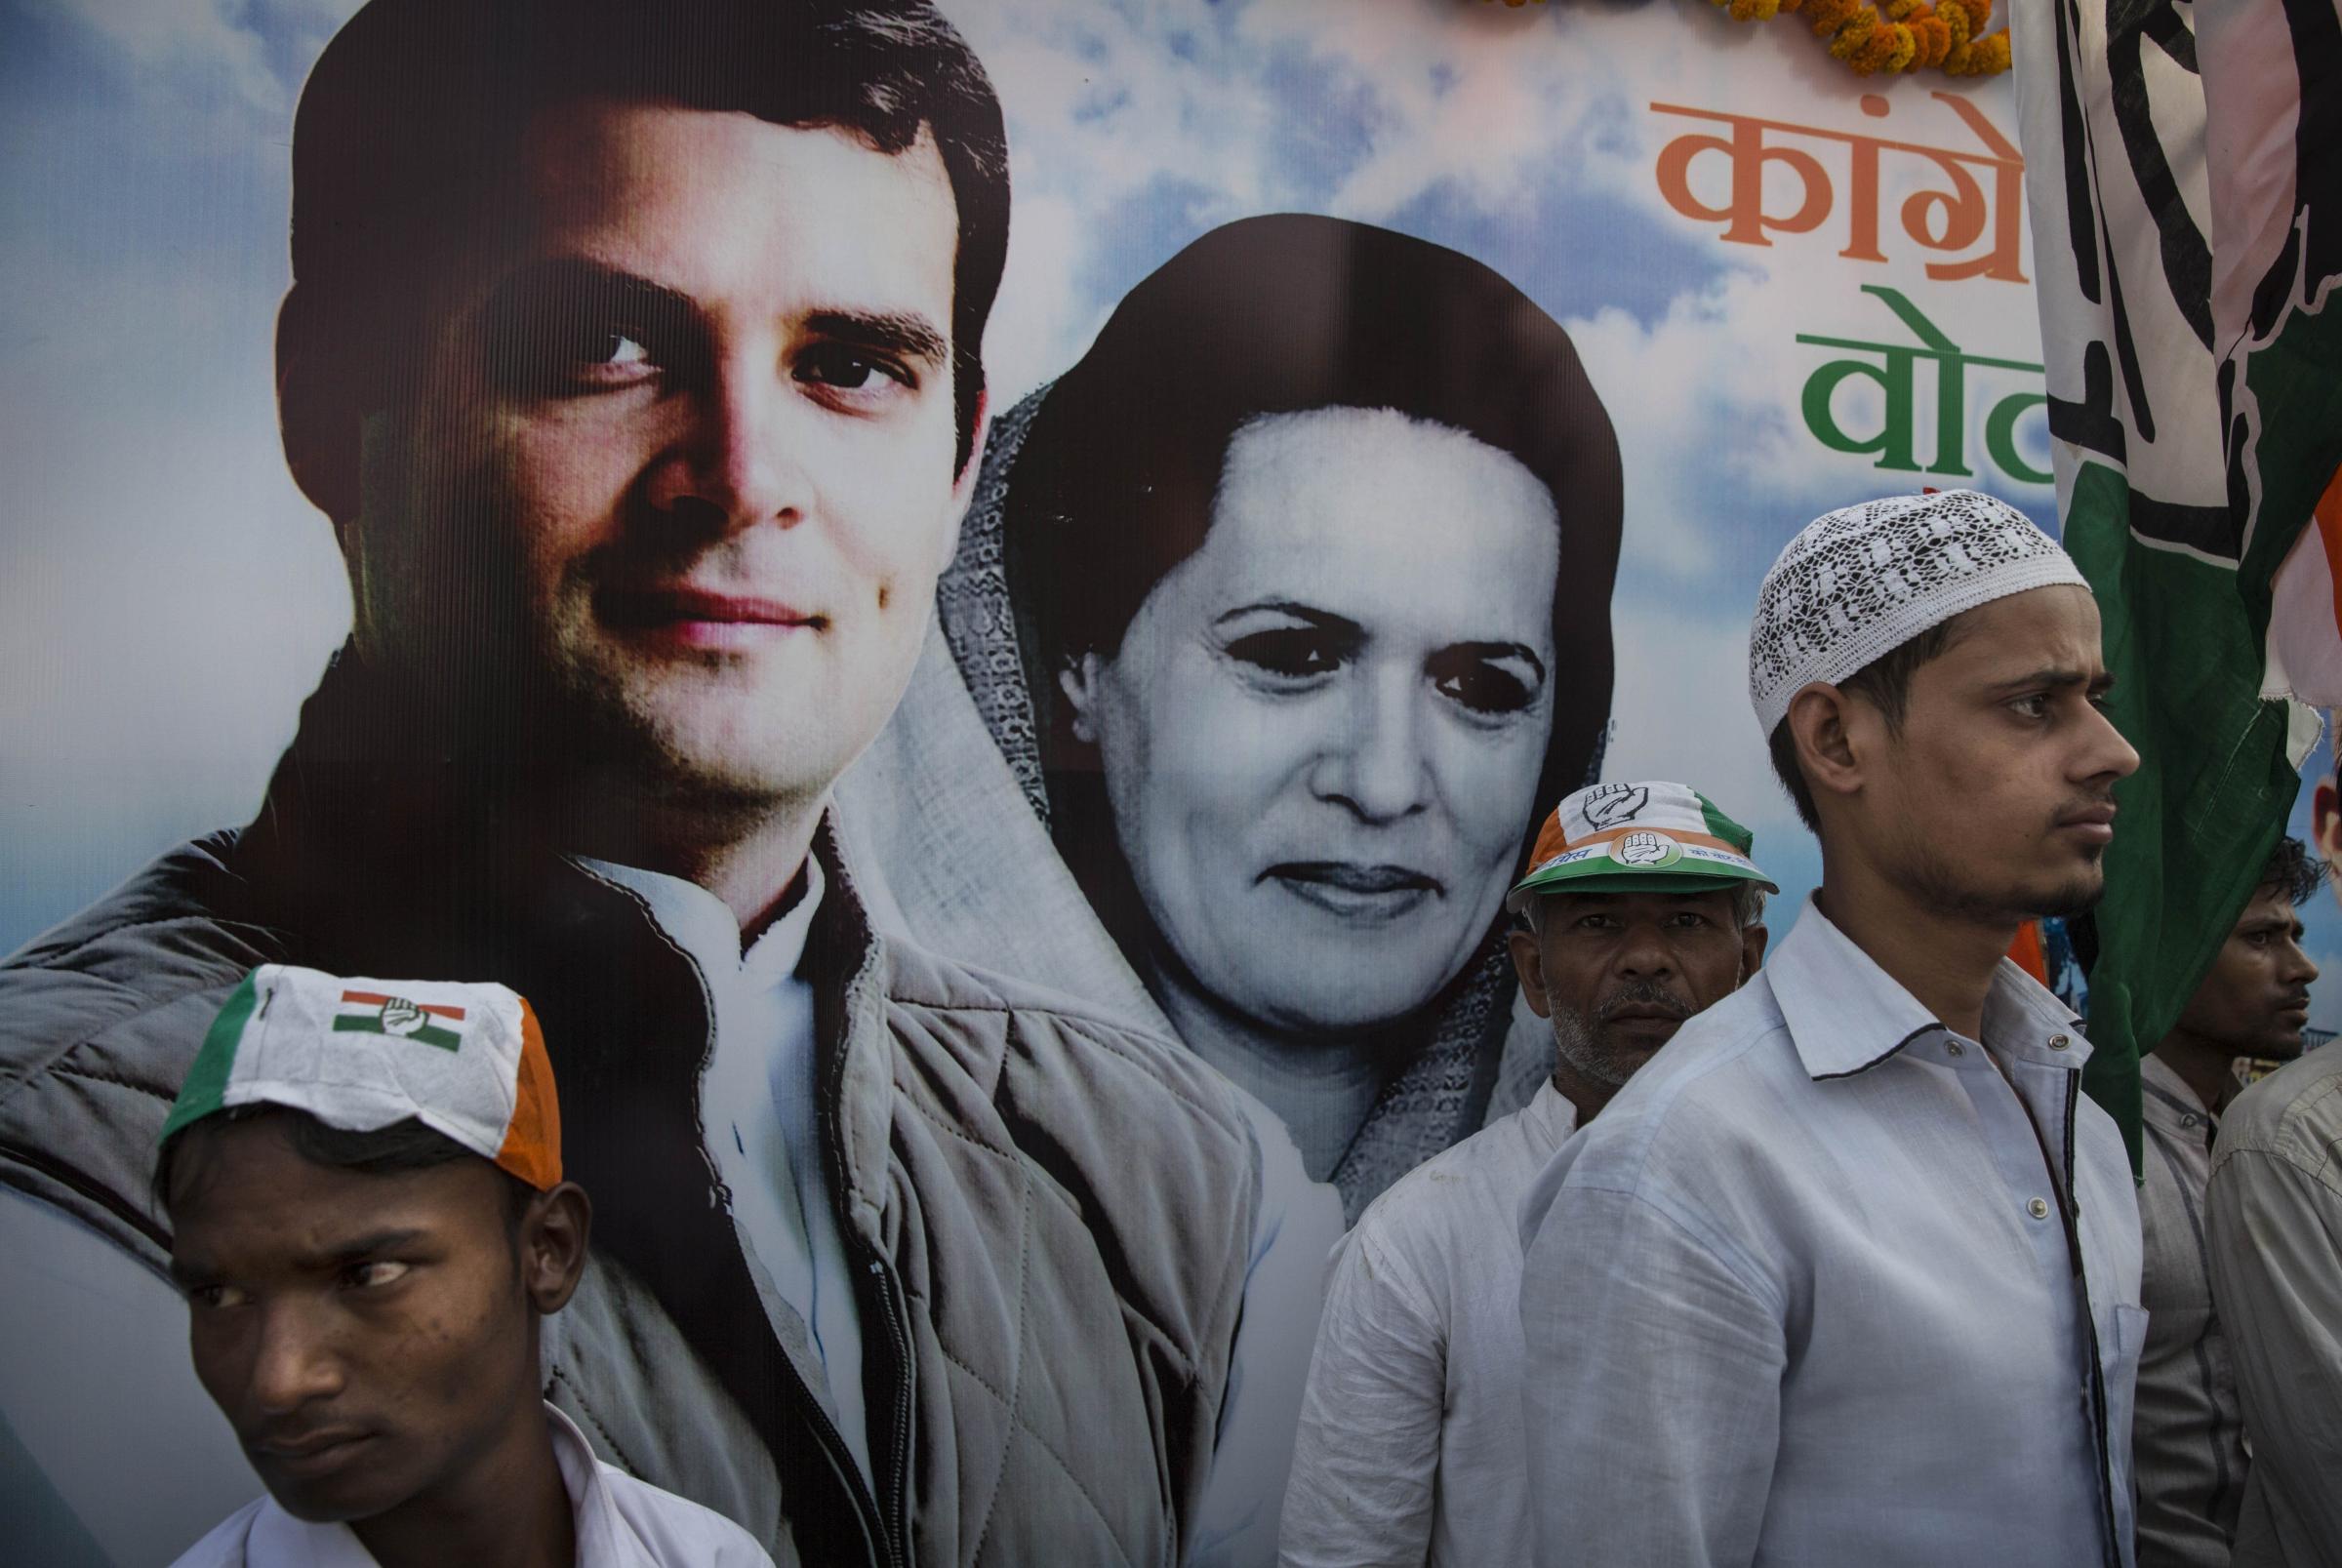 Supporters of the Congress Party stand in fron of a poster showing Rahul Gandhi and his mother and party president Sonia Gandhi as they wait before a rally on May 10, 2014 in Varanasi.